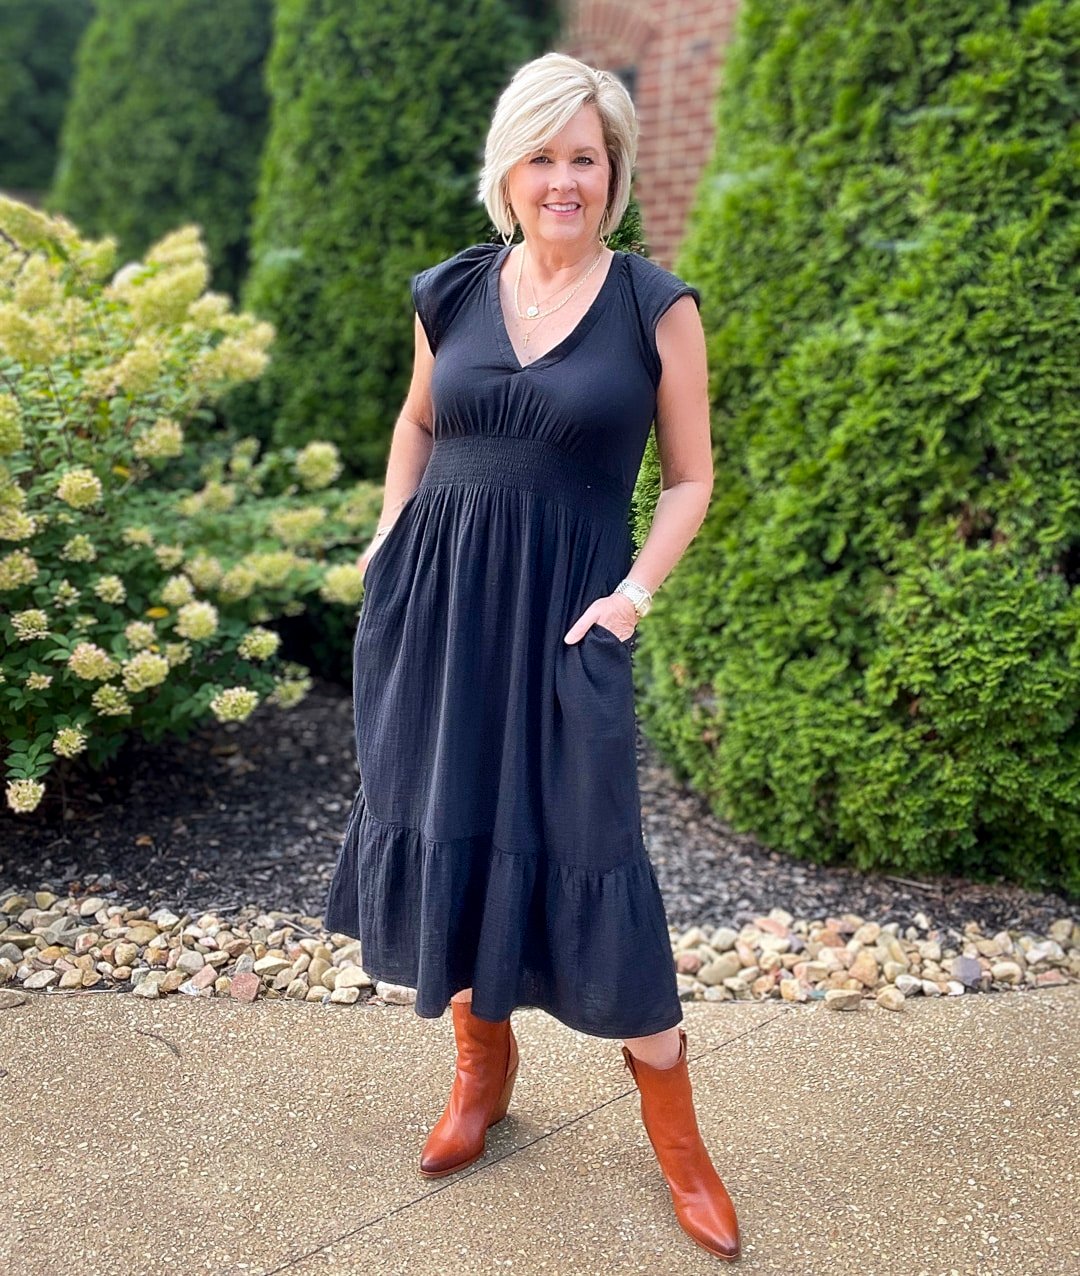 Over 40 Fashion Blogger, Tania Stephens is styling Old Navy Fall Dresses with western boots40